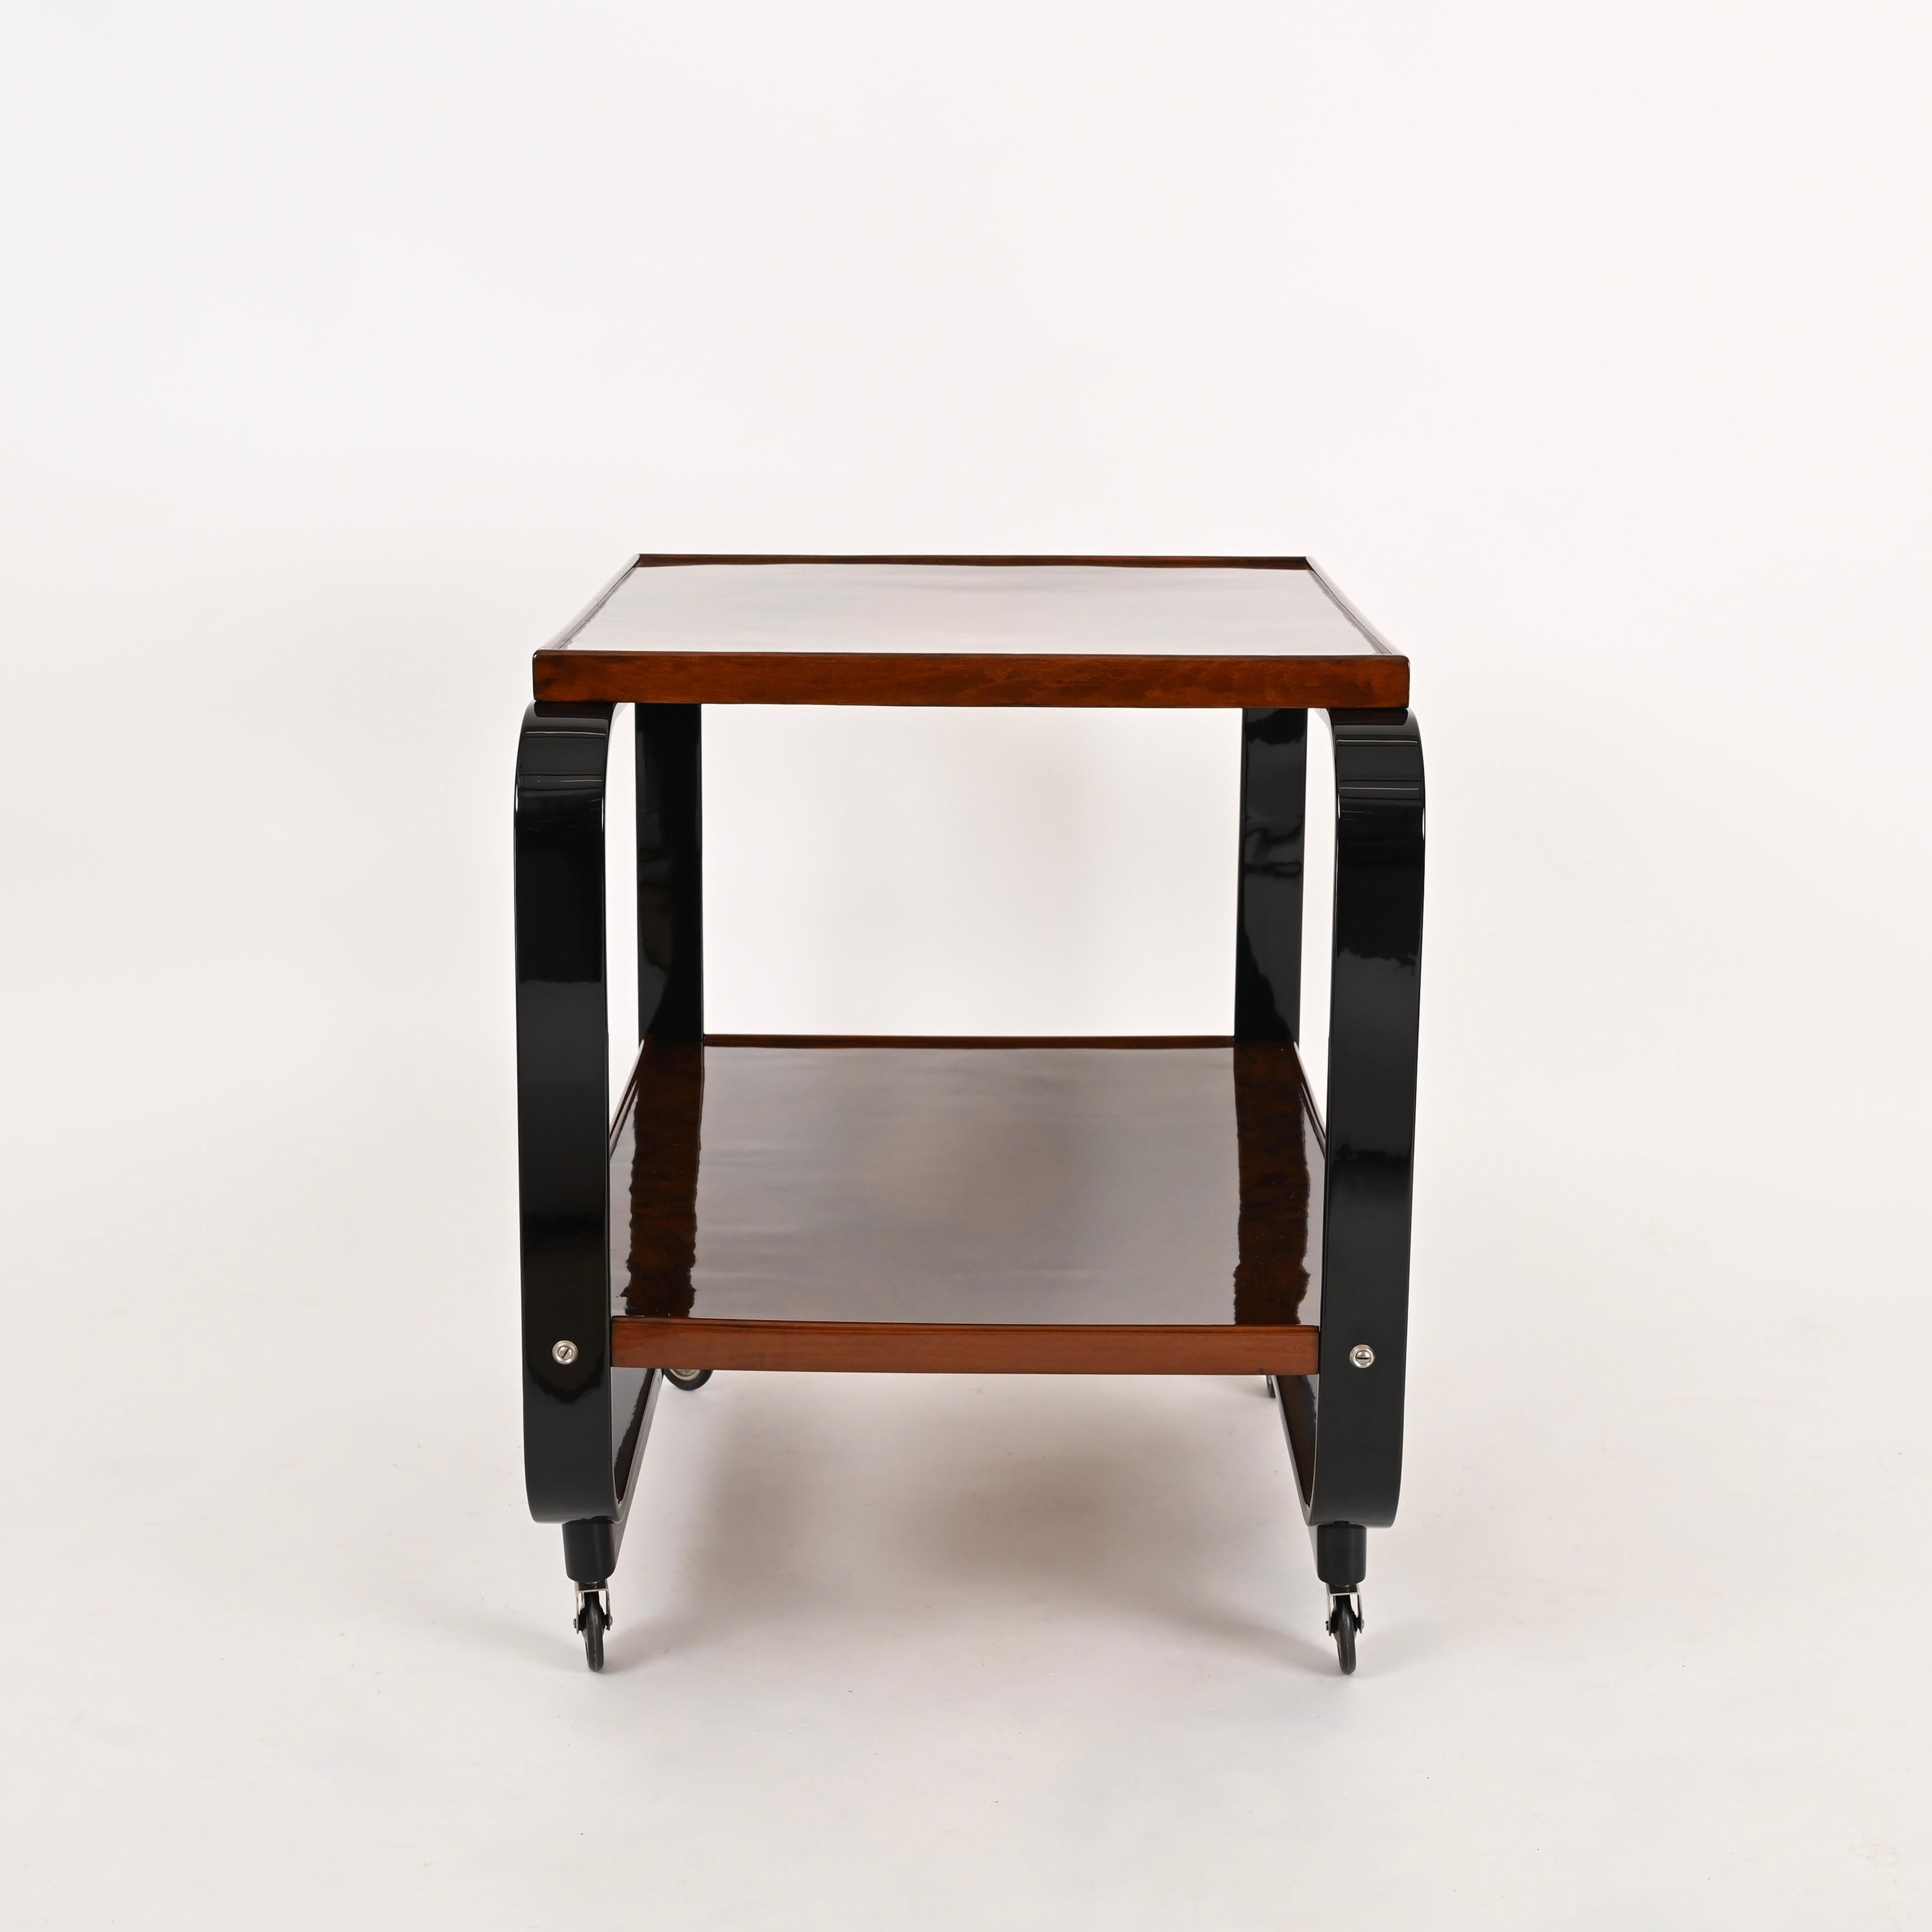 Serving Bar Cart by Gino Maggioni Signed, Bent Curly Walnut Wood, Italy, 1930s For Sale 8